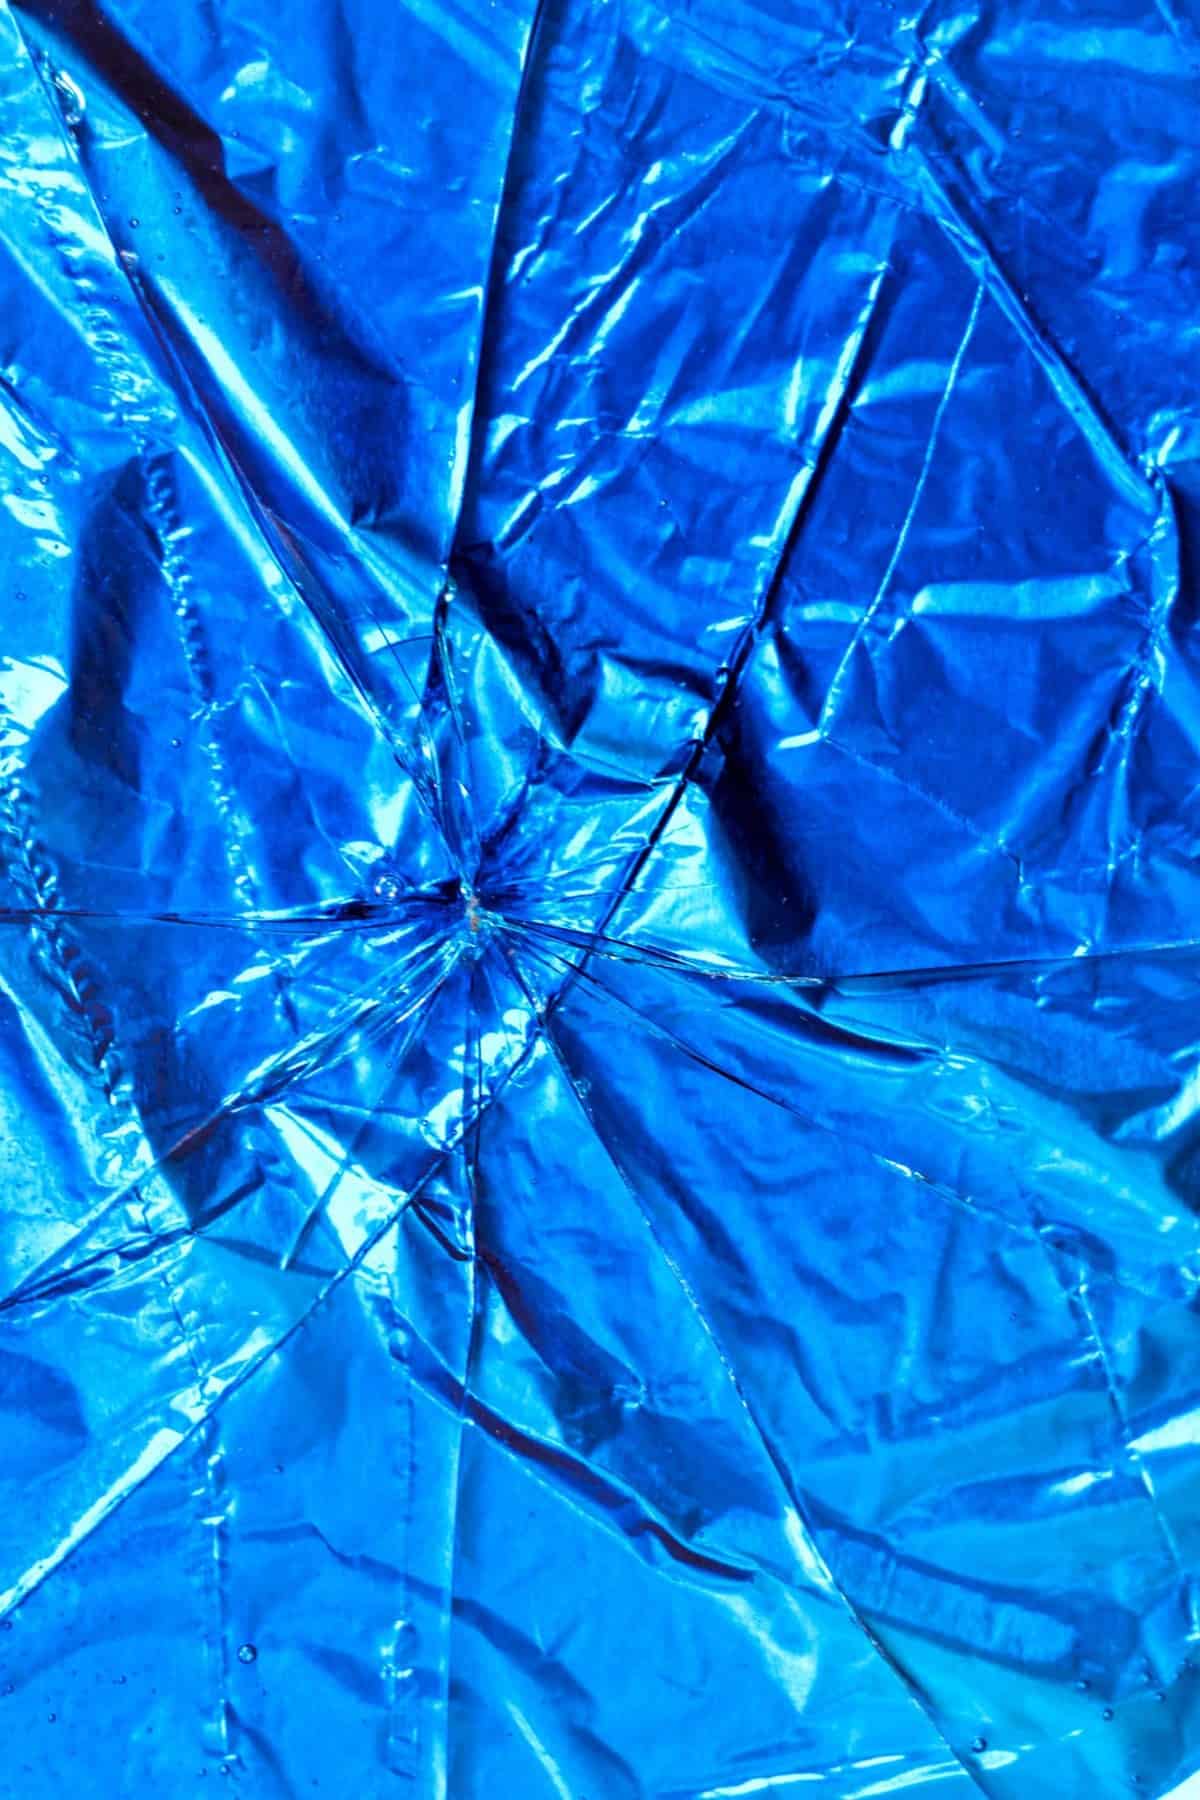 Image of sheet of blue rock candy with several cracks in it.